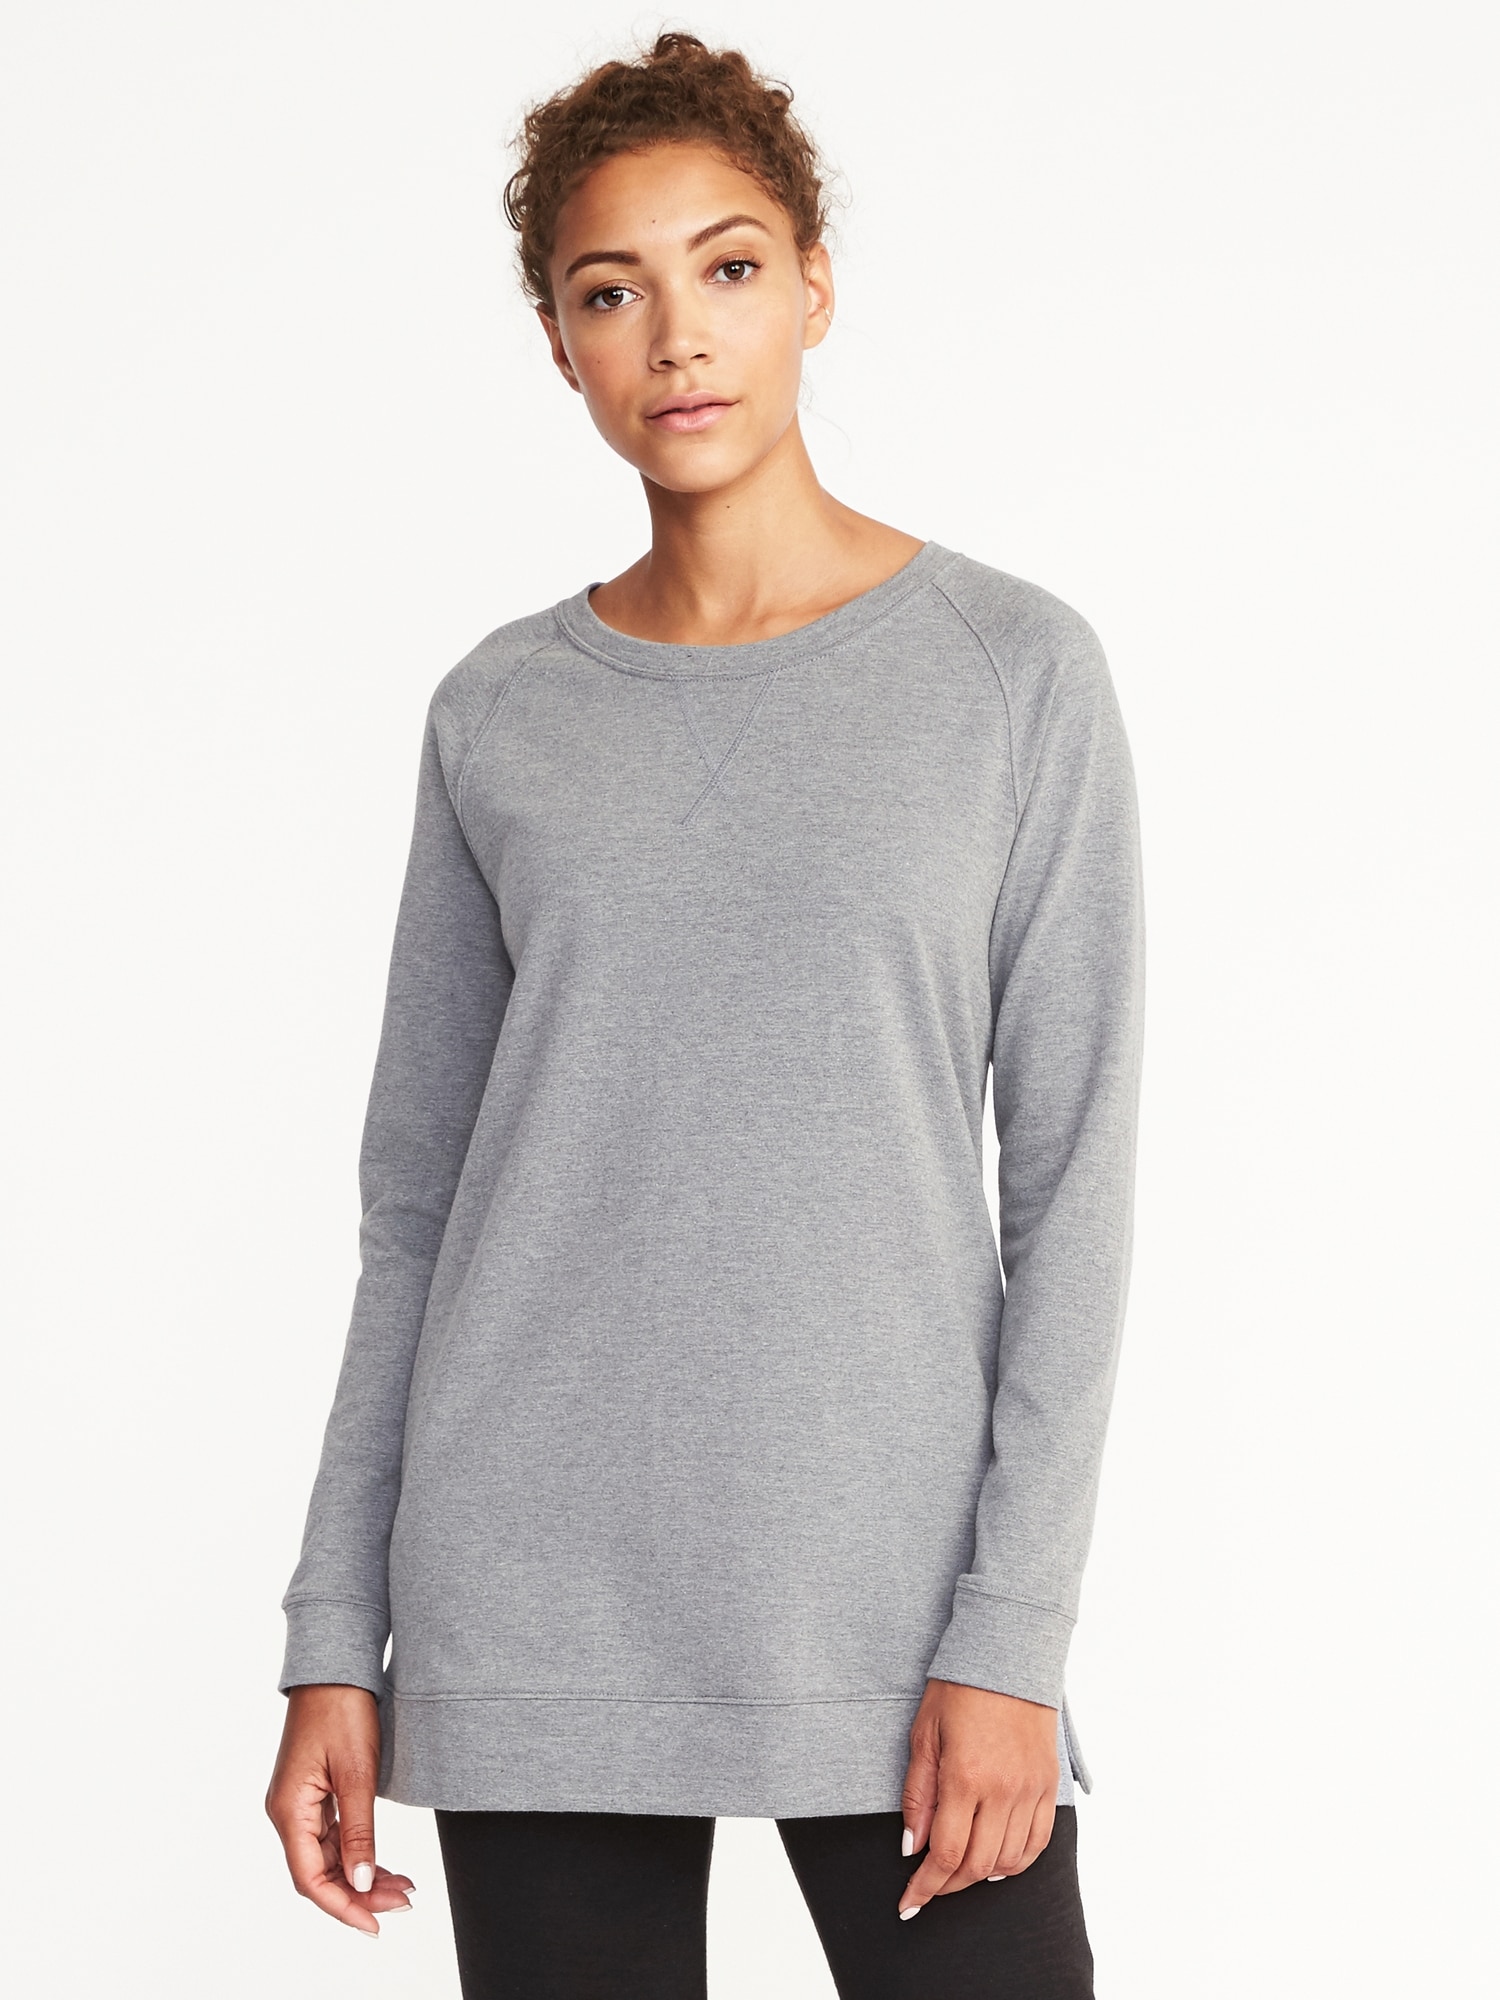 French-Terry Sweatshirt Tunic for Women | Old Navy